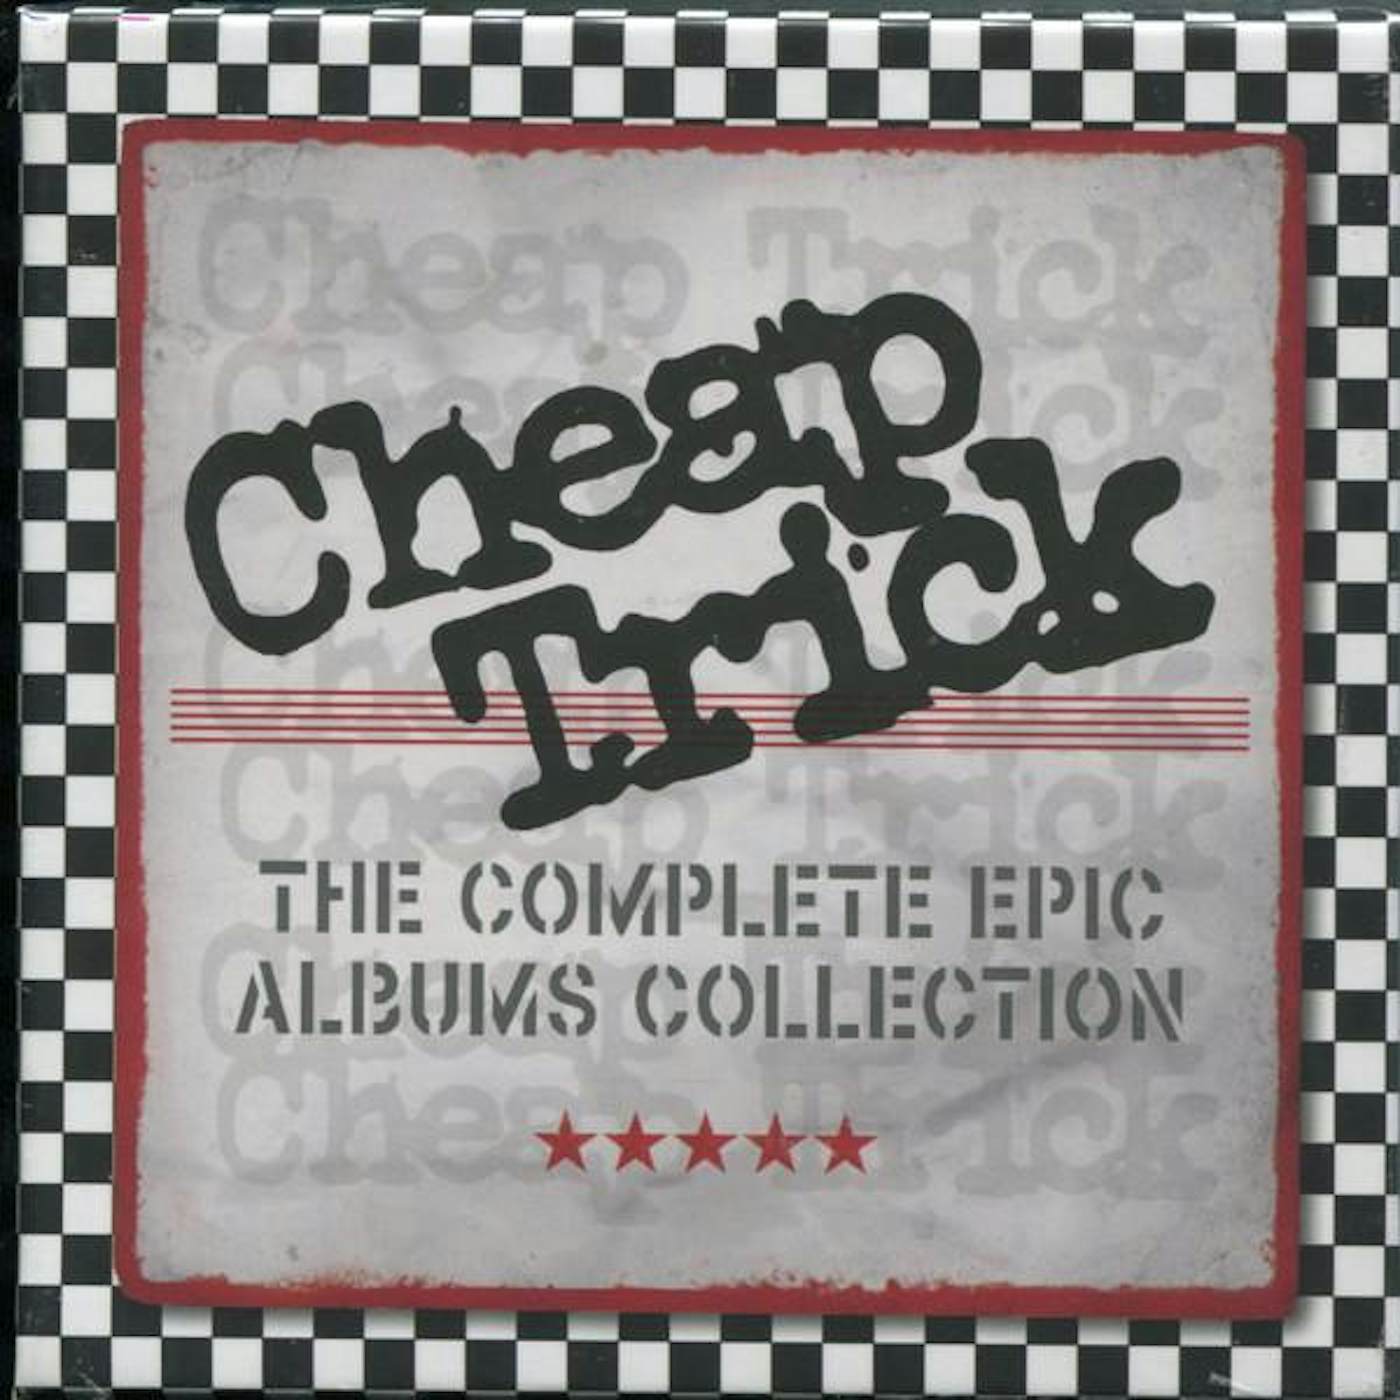 Cheap Trick COMPLETE EPIC ALBUMS (14CD) CD